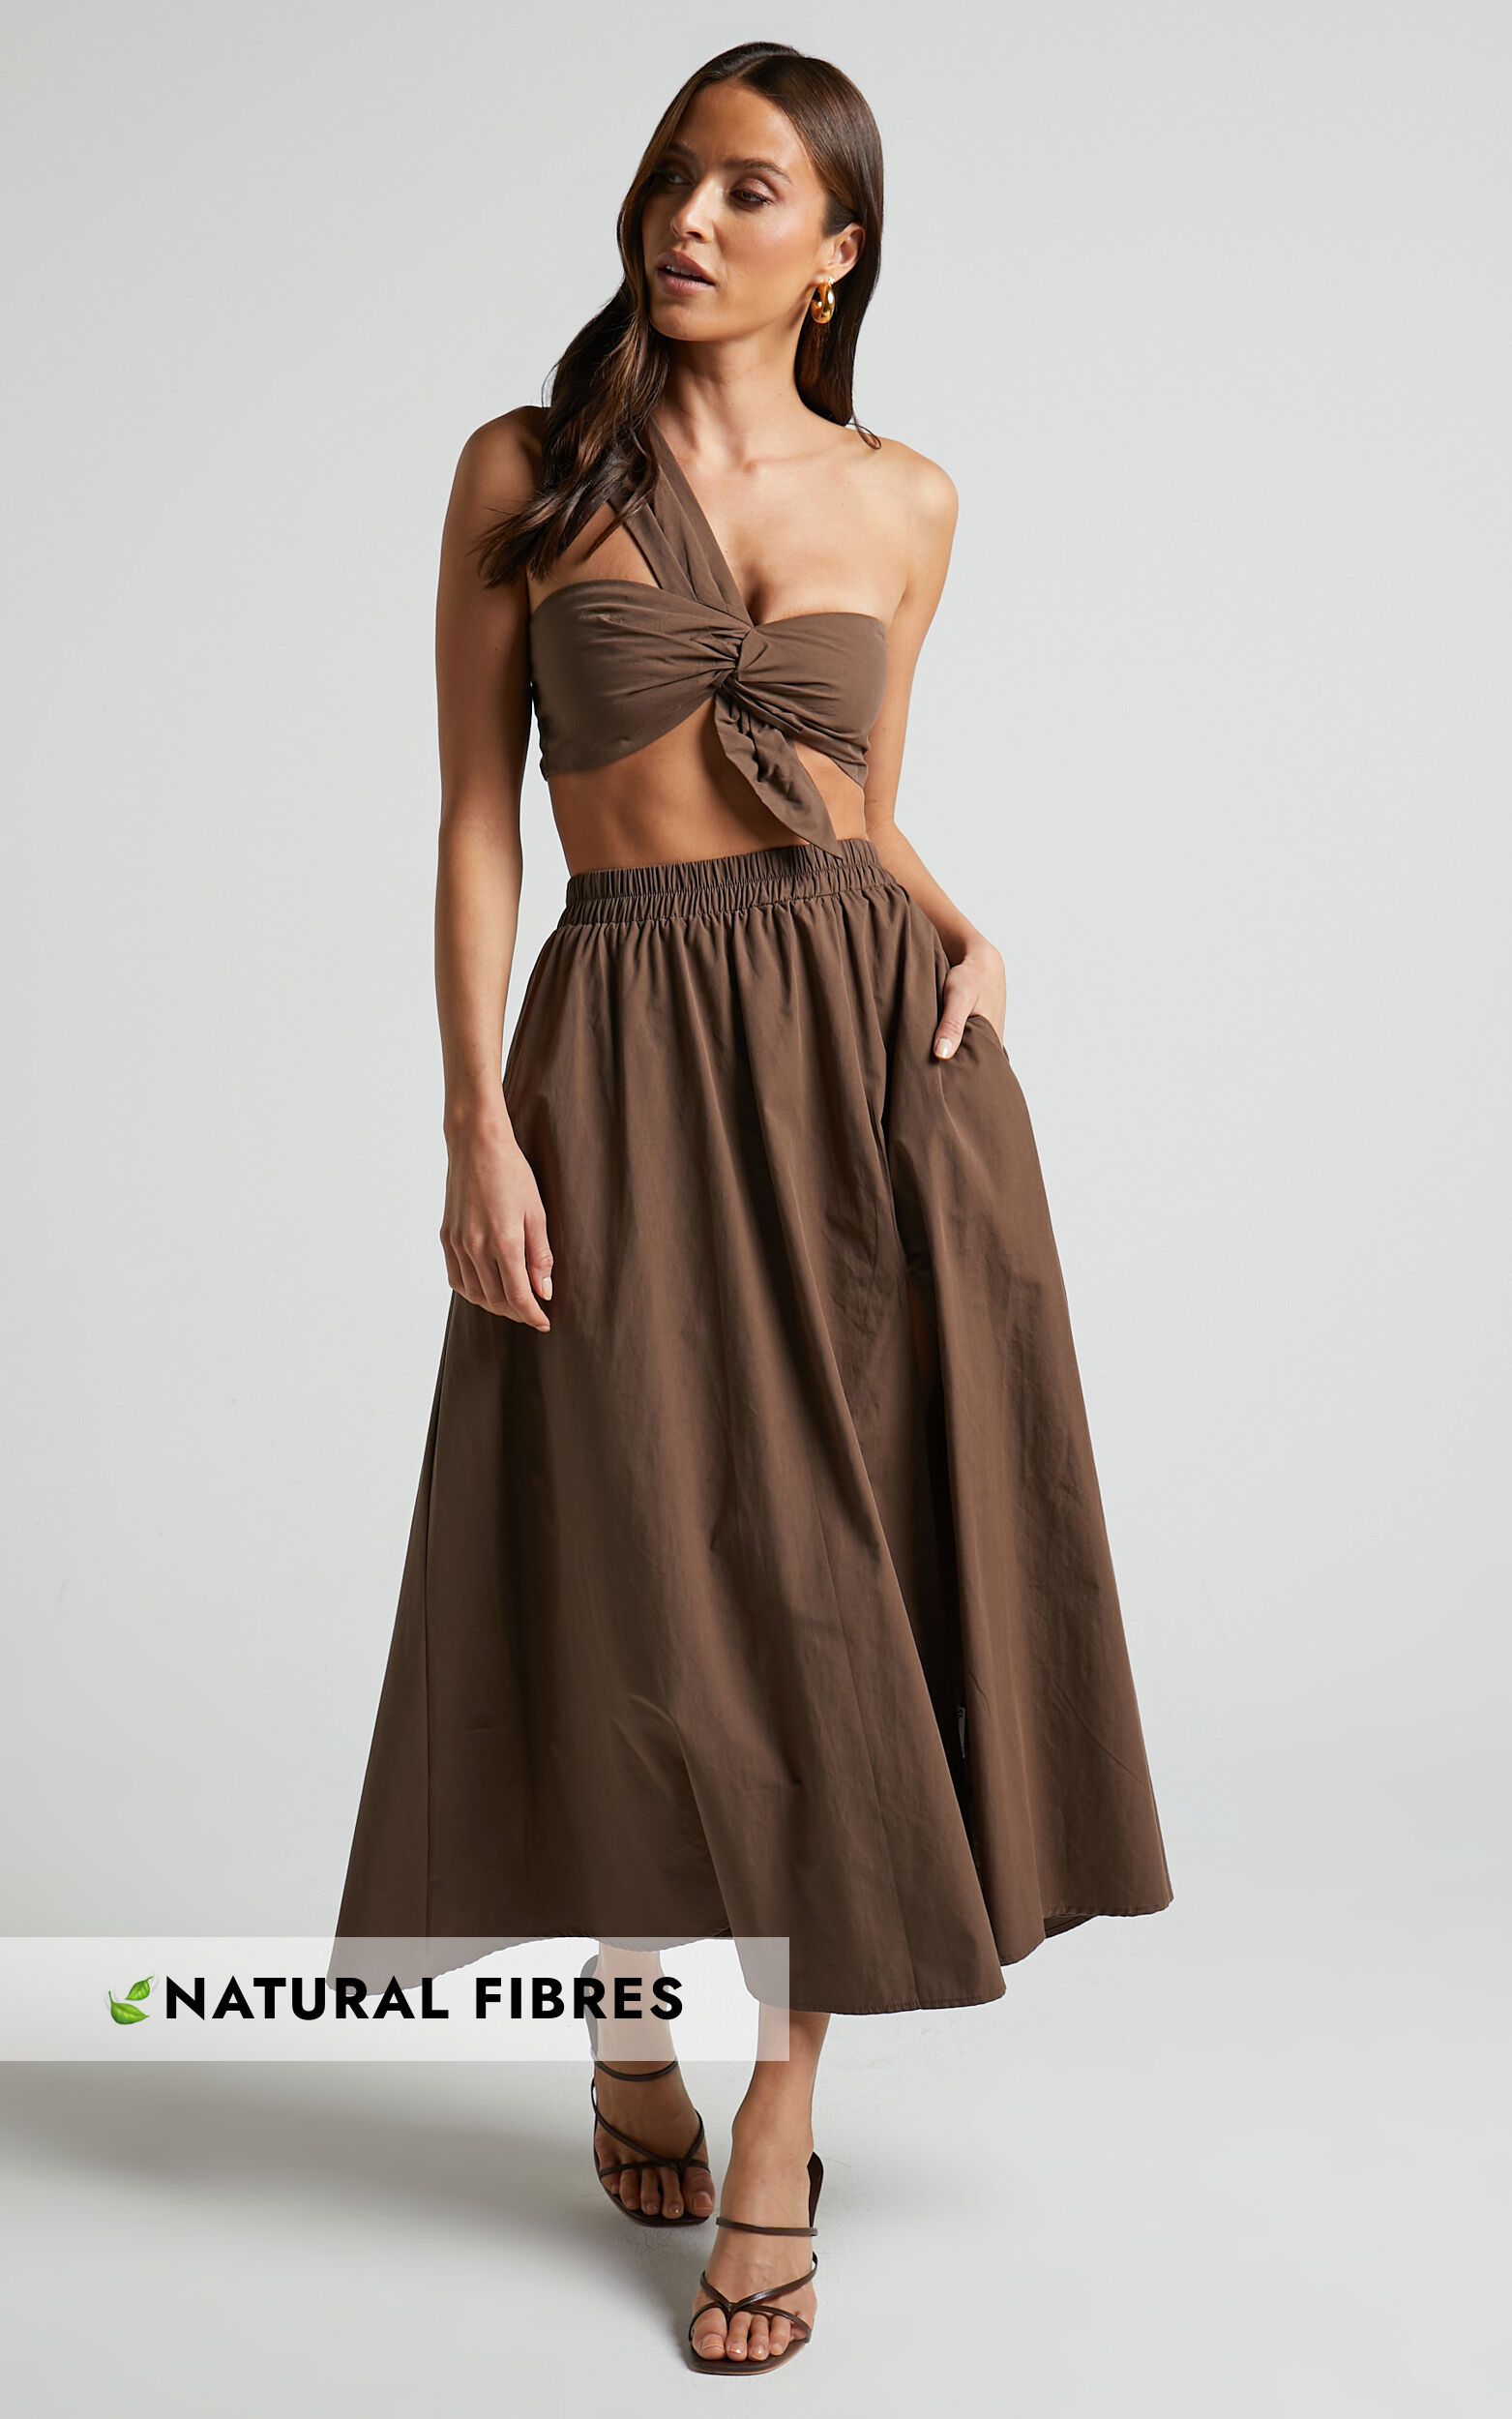 Sula Two Piece Set - One Shoulder Bralette Crop Top and Midi Skirt Set in Chocolate | Showpo (US, UK & Europe)